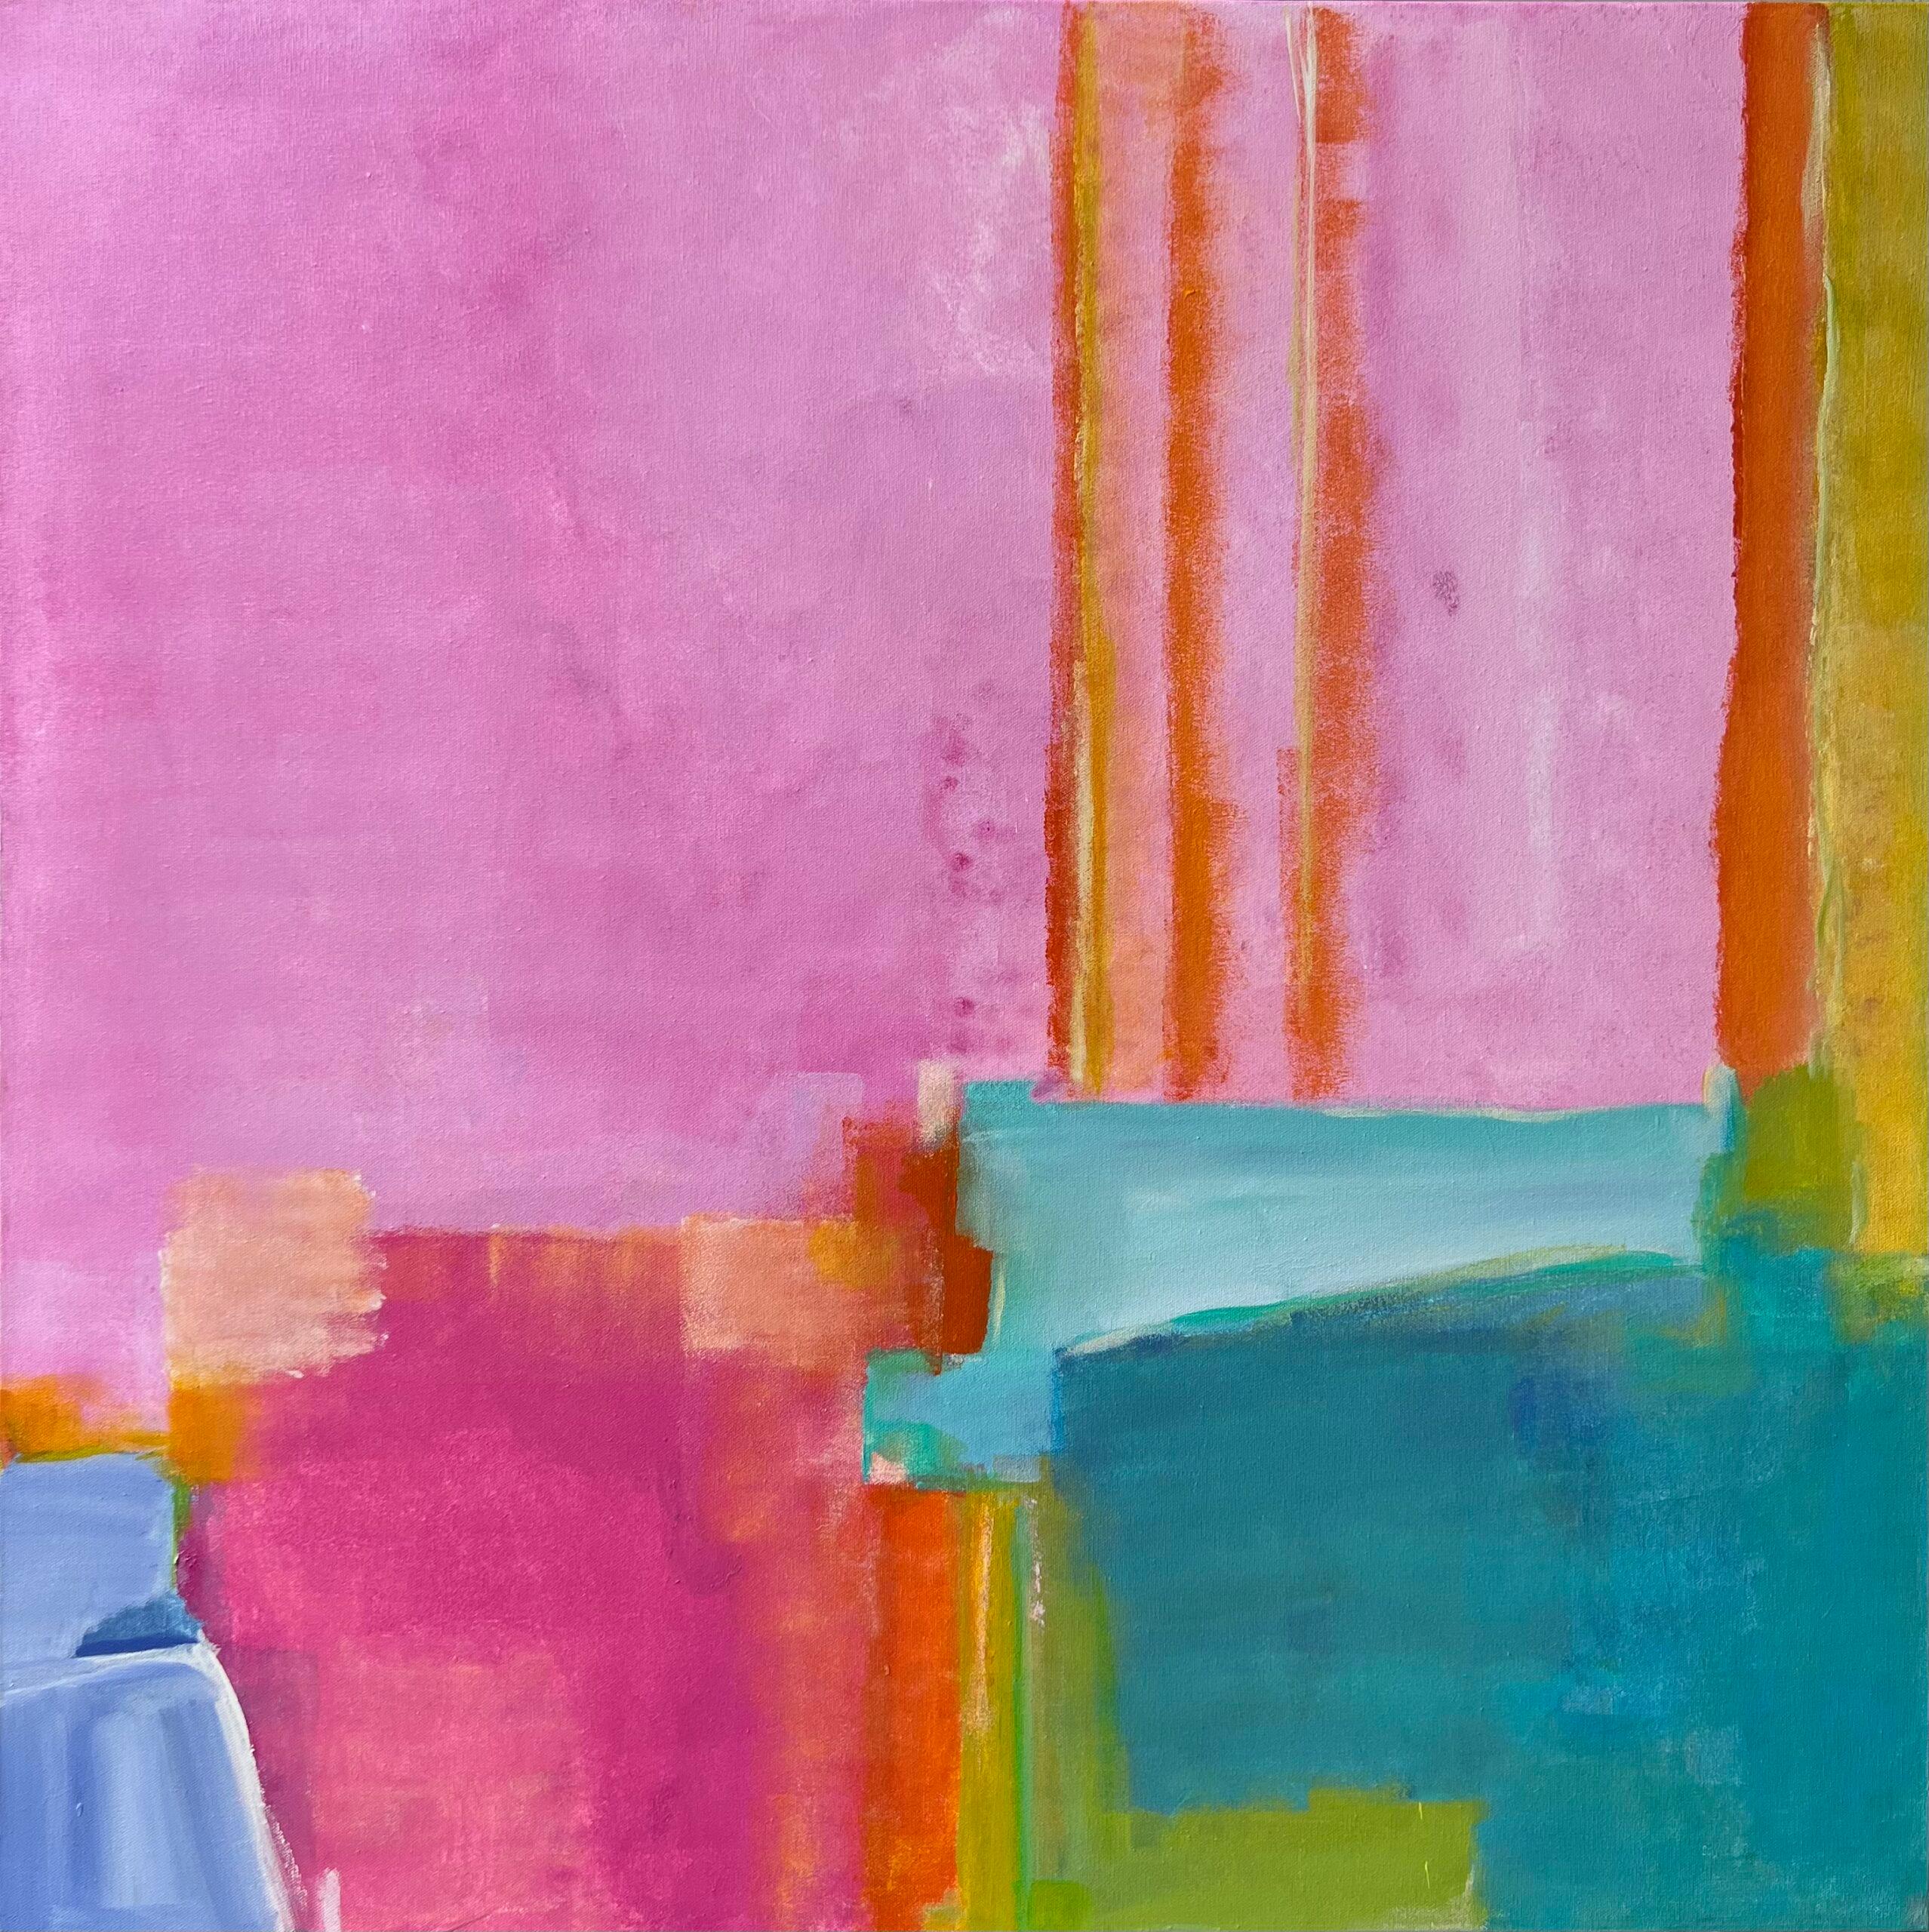 Pretty in Pink (Gestural Abstract, Pink, Orange, Yellow, Turquoise, Vibrant) - Painting by Kelley Carman